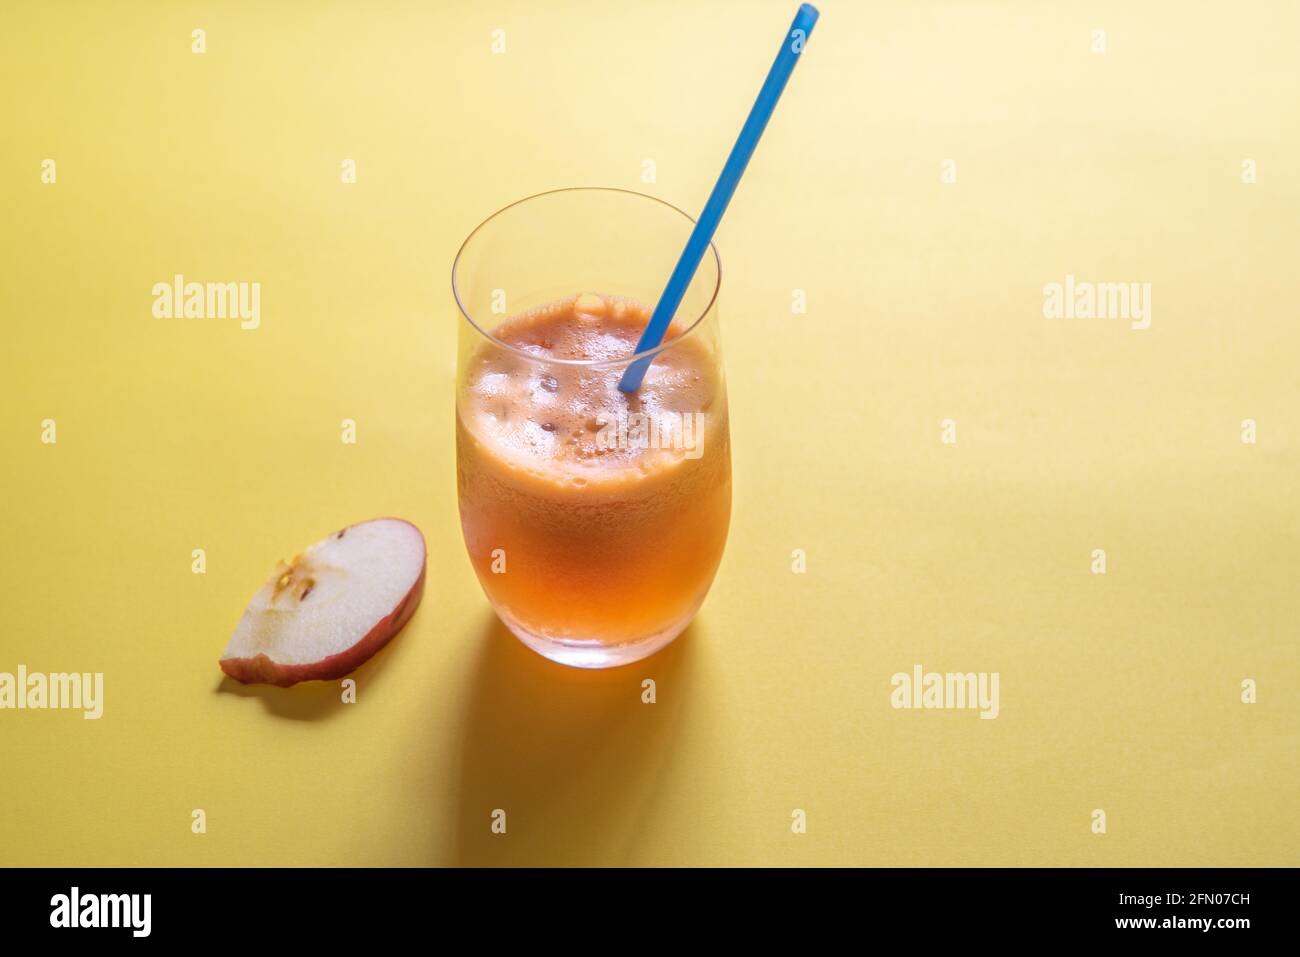 Antioxidant juice of red apple, green apple, pear, and carrot. Stock Photo